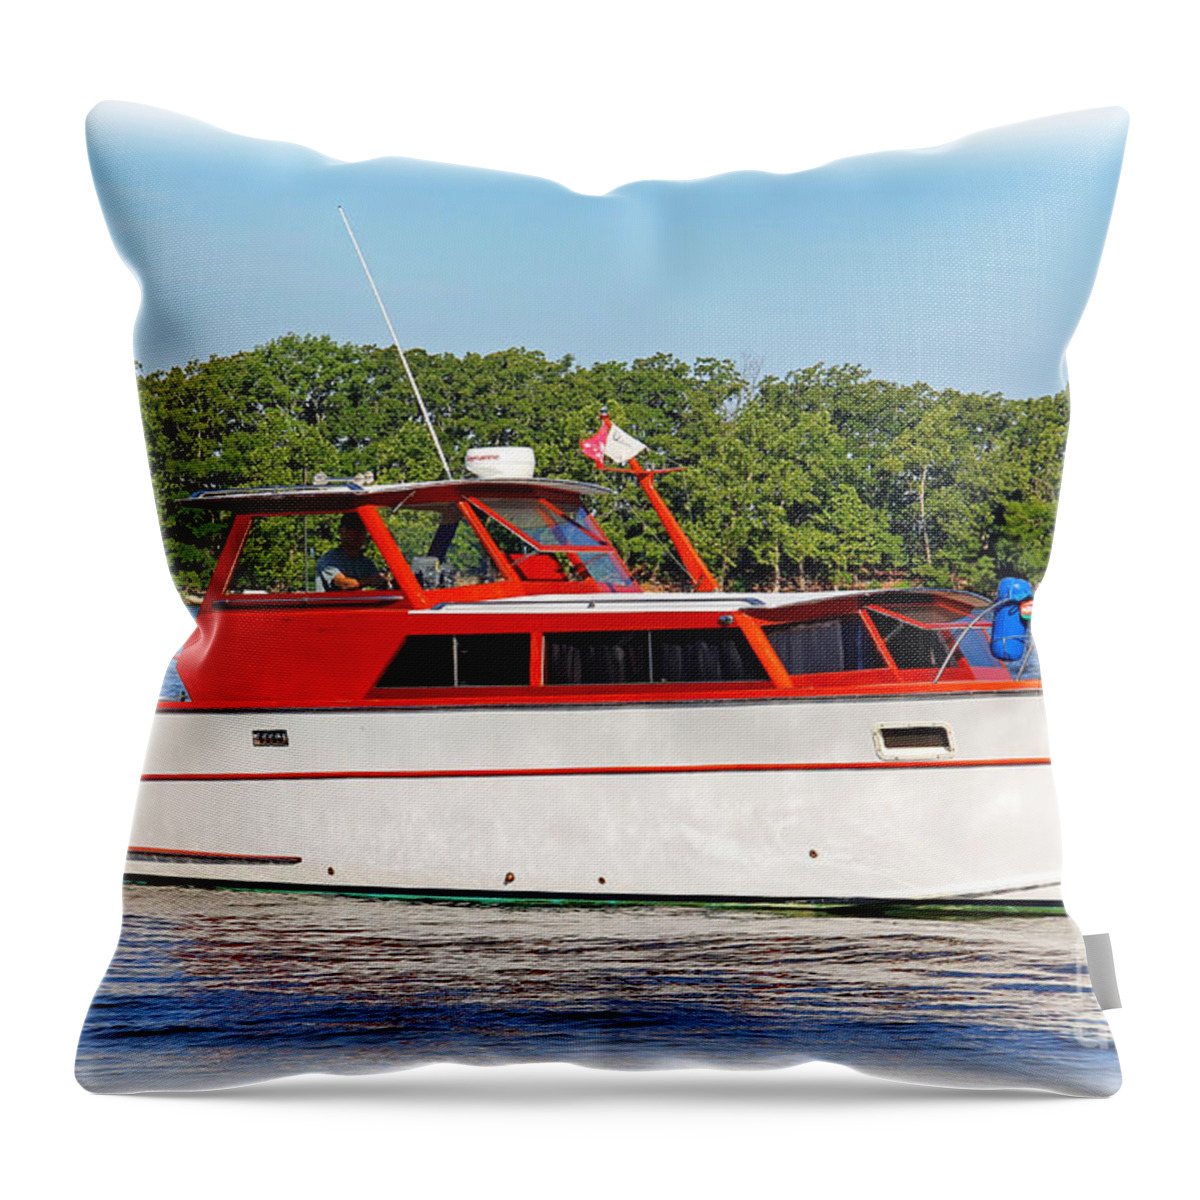 Oklahoma Throw Pillow featuring the photograph Classic Cruiser by Bob Hislop